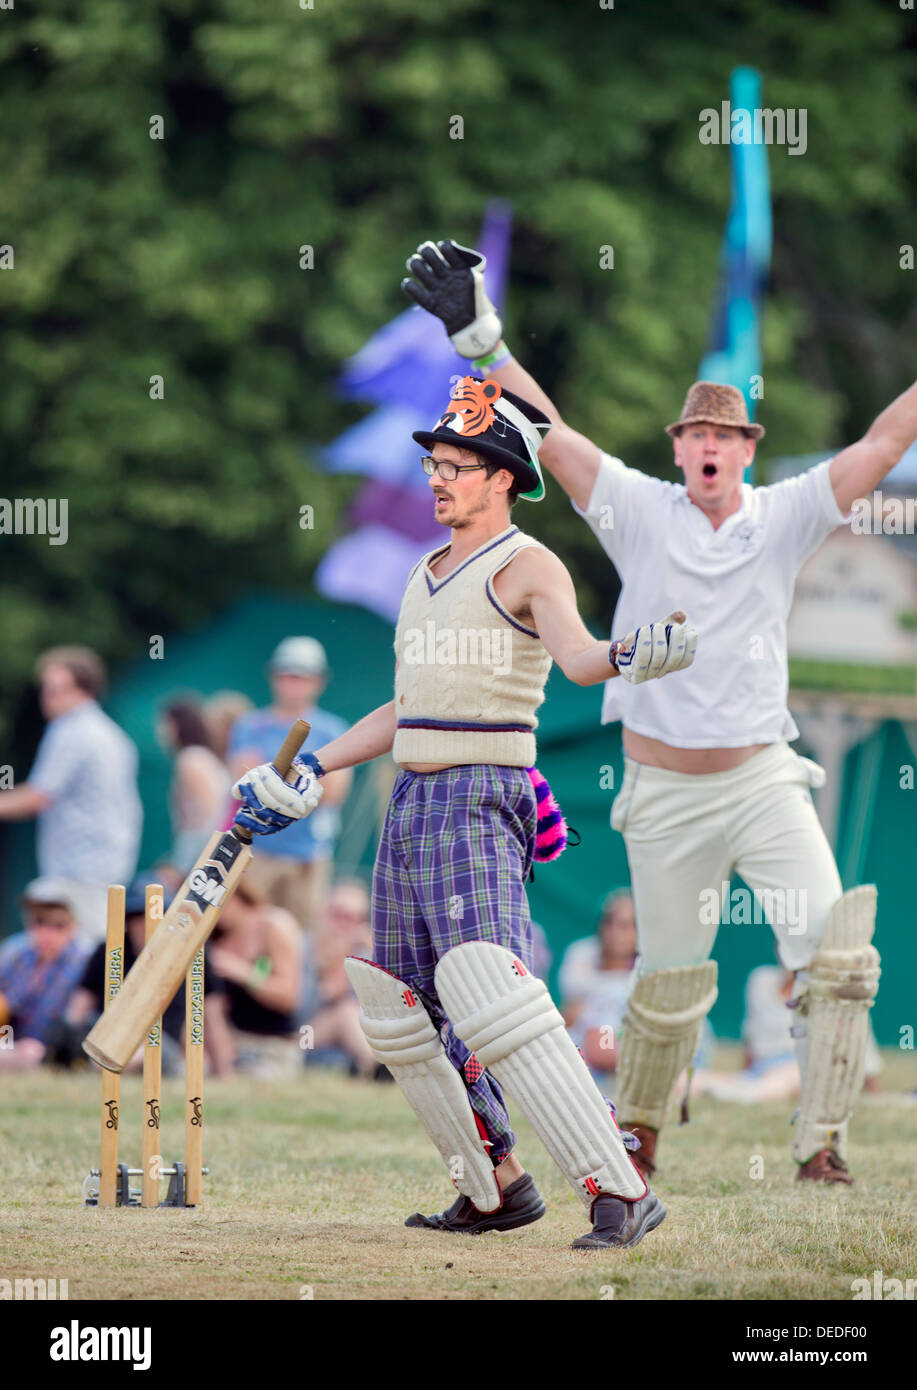 The Wilderness Festival at Cornbury Park, Oxfordshire (10 Aug 2013). - The Wilderness Urn light hearted cricket match. Stock Photo